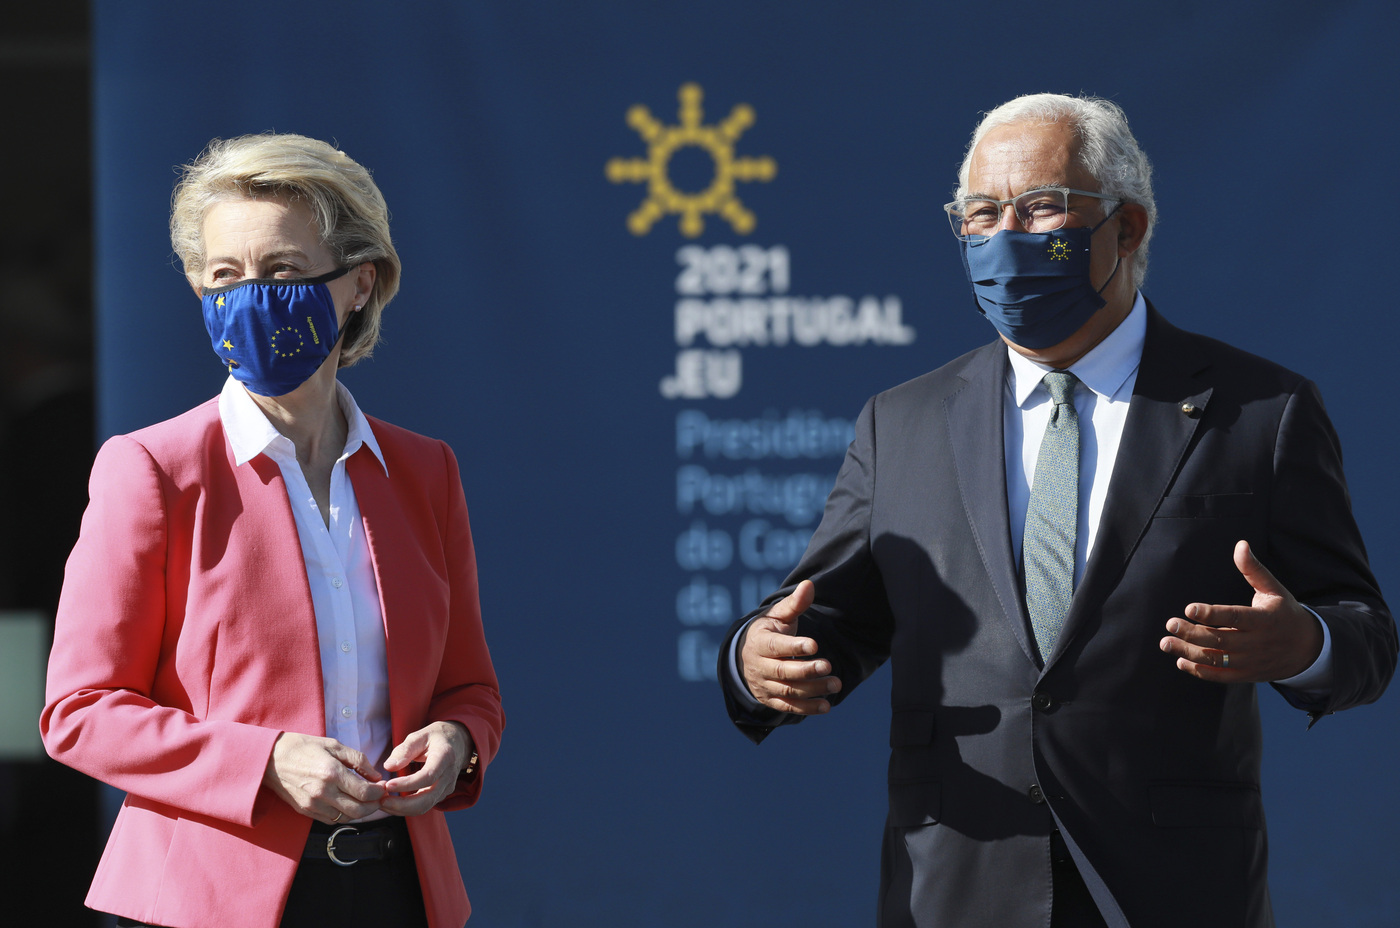 European Commission President Ursula von der Leyen, left, is greeted by Portugal's Prime Minister Antonio Costa during arrival for an EU summit at the Crystal Palace in Porto, Portugal, Saturday, May 8, 2021. On Saturday, EU leaders hold an online summit with India's Prime Minister Narendra Modi, covering trade, climate change and help with India's COVID-19 surge. (Estele Silva, Pool via AP)